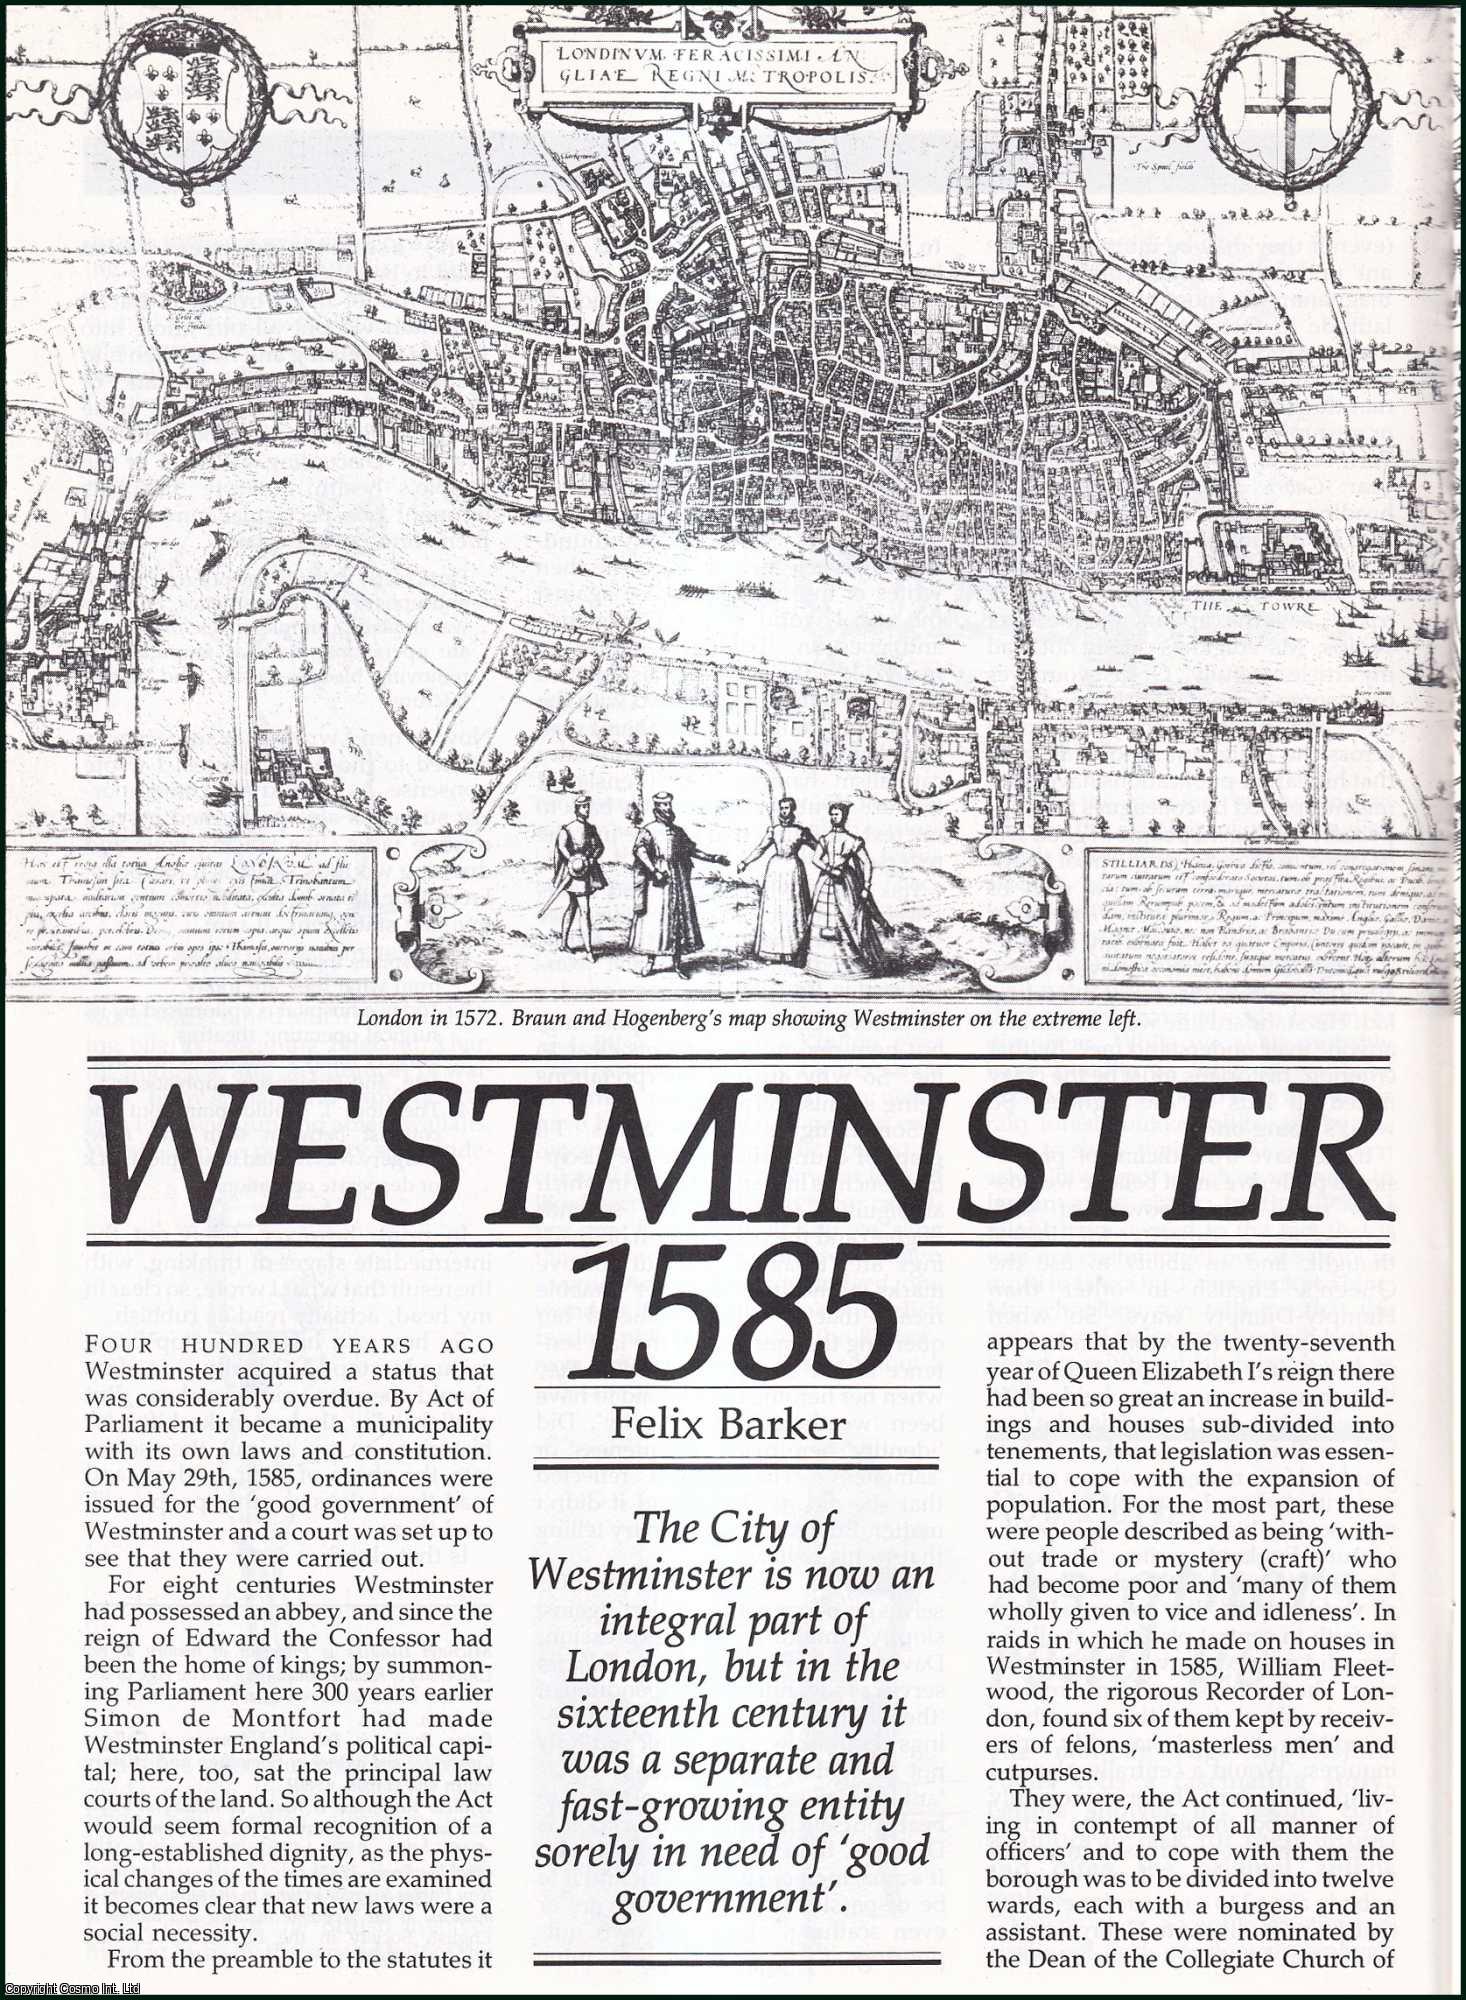 Felix Barker - Westminster, 1585. An original article from History Today, 1985.